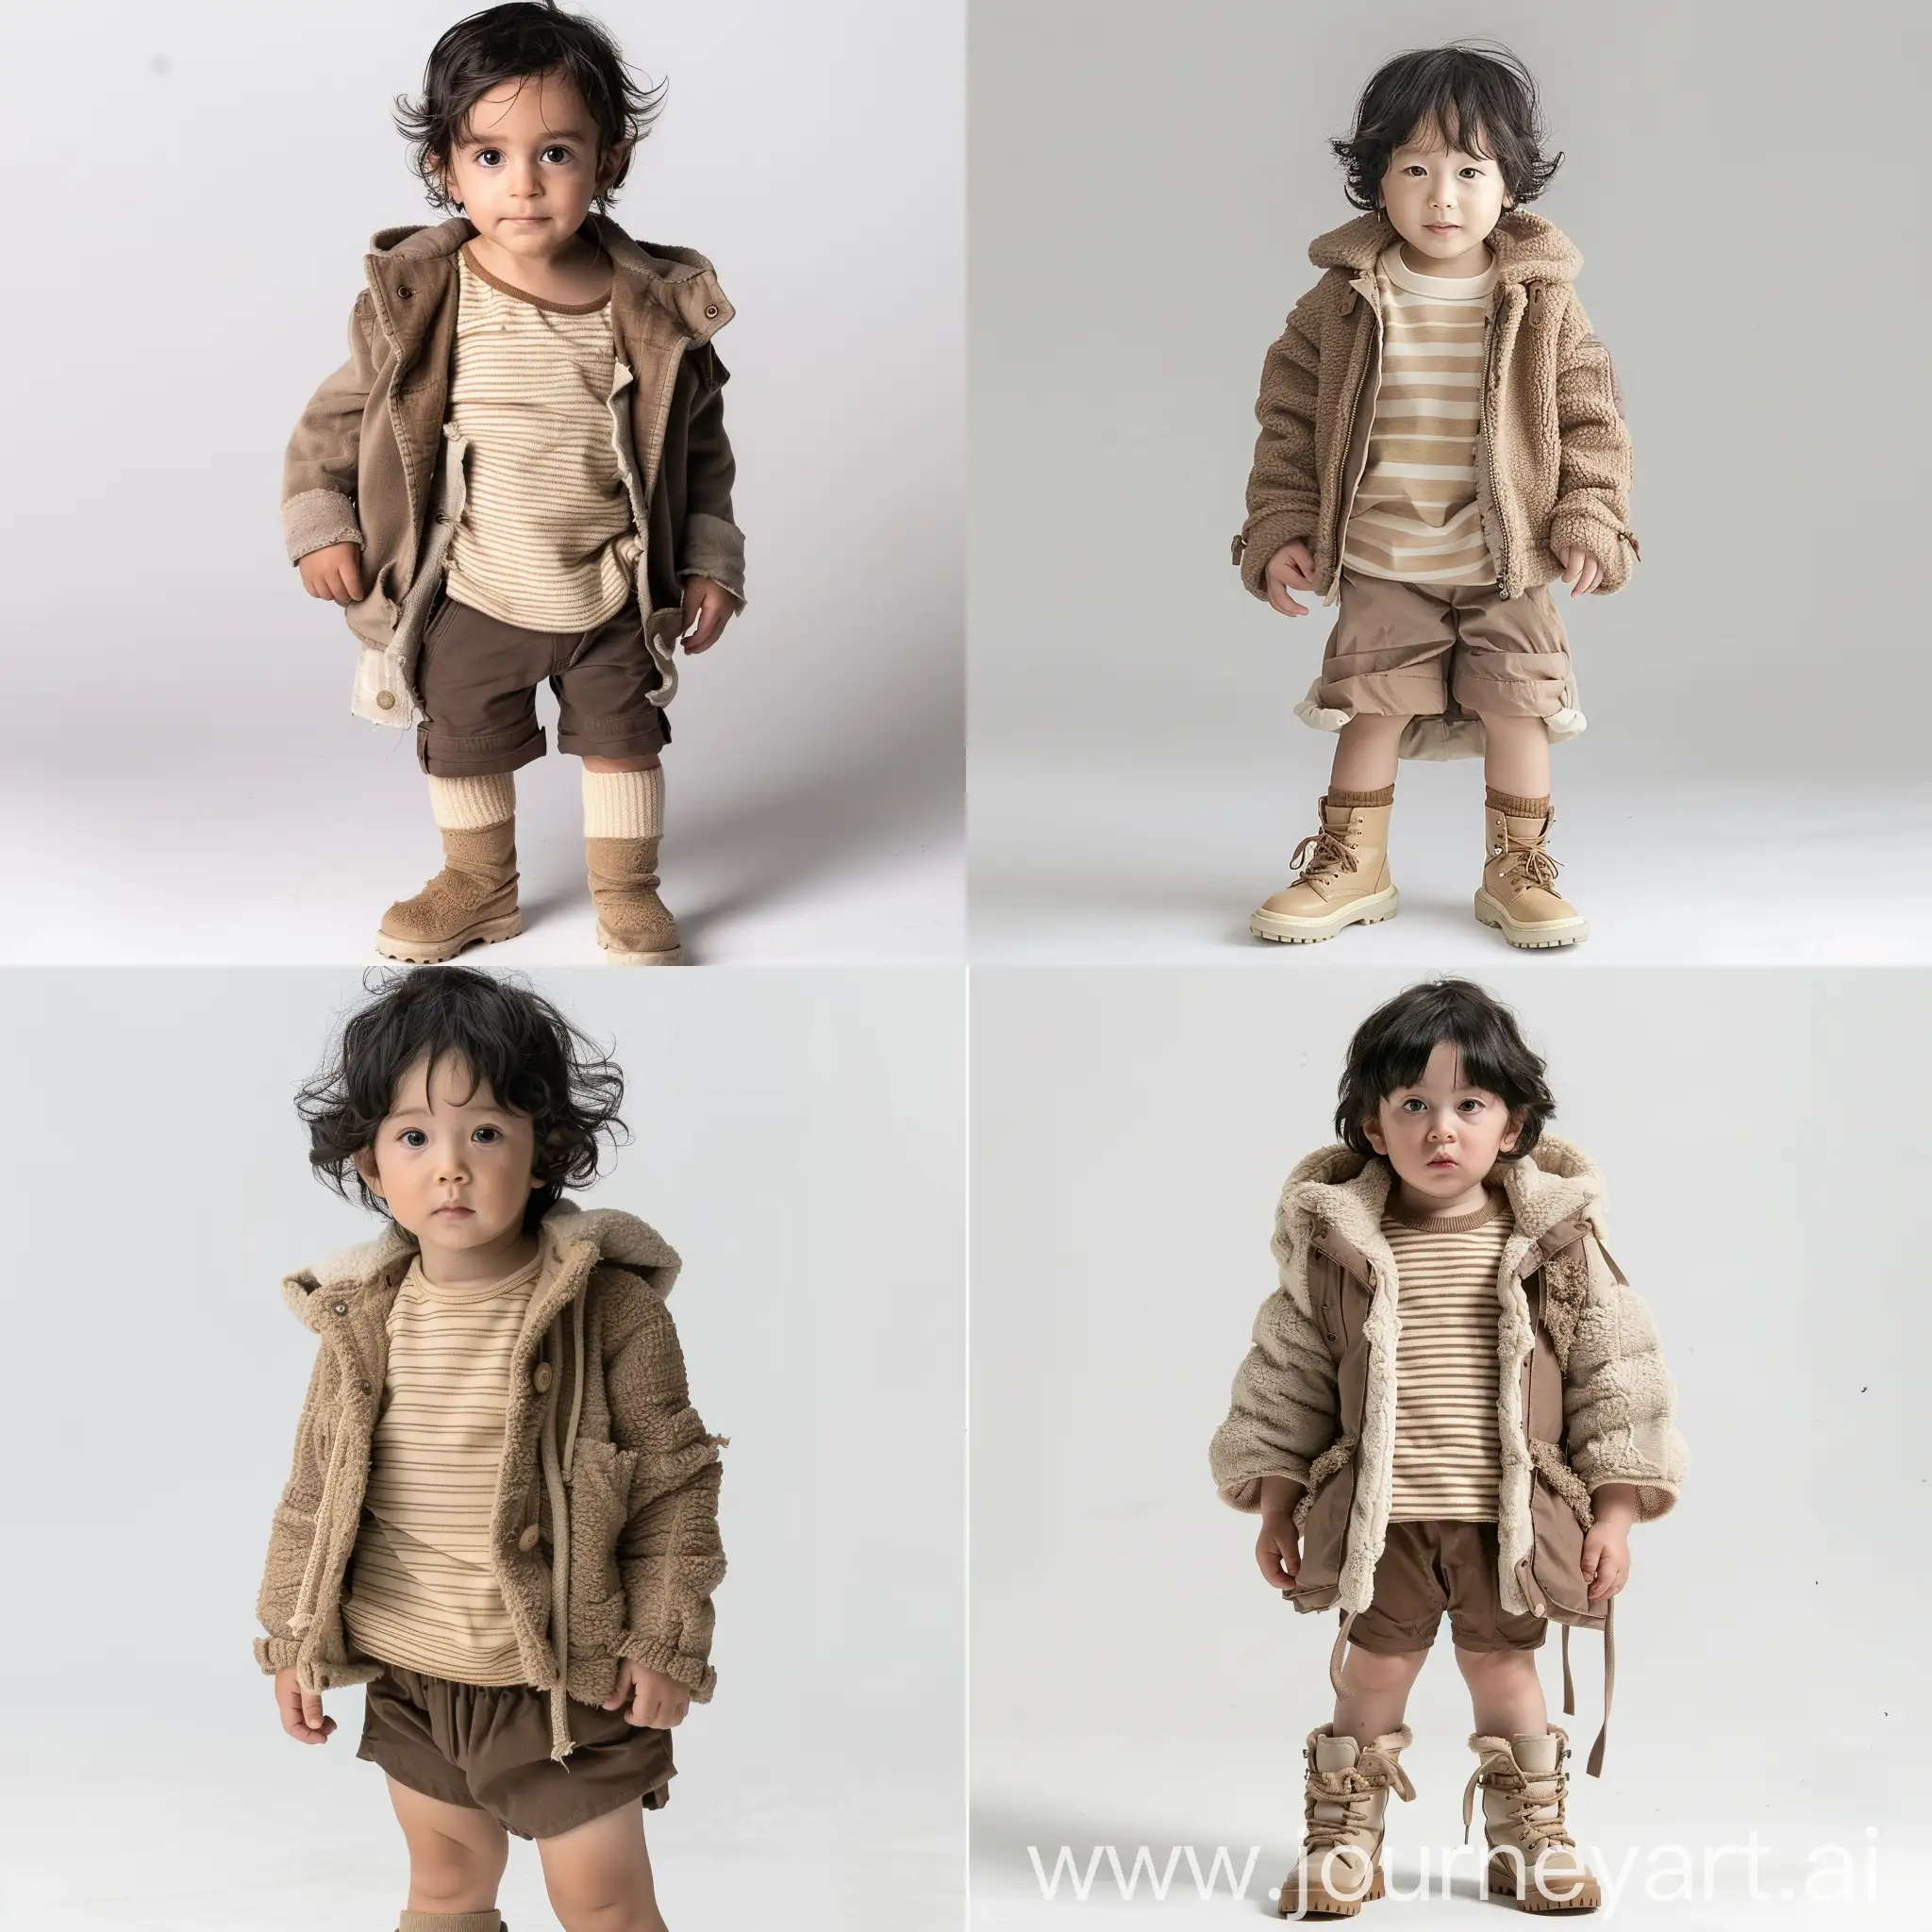 Adorable-OneYearOld-Boy-in-Beige-and-Brown-Outfit